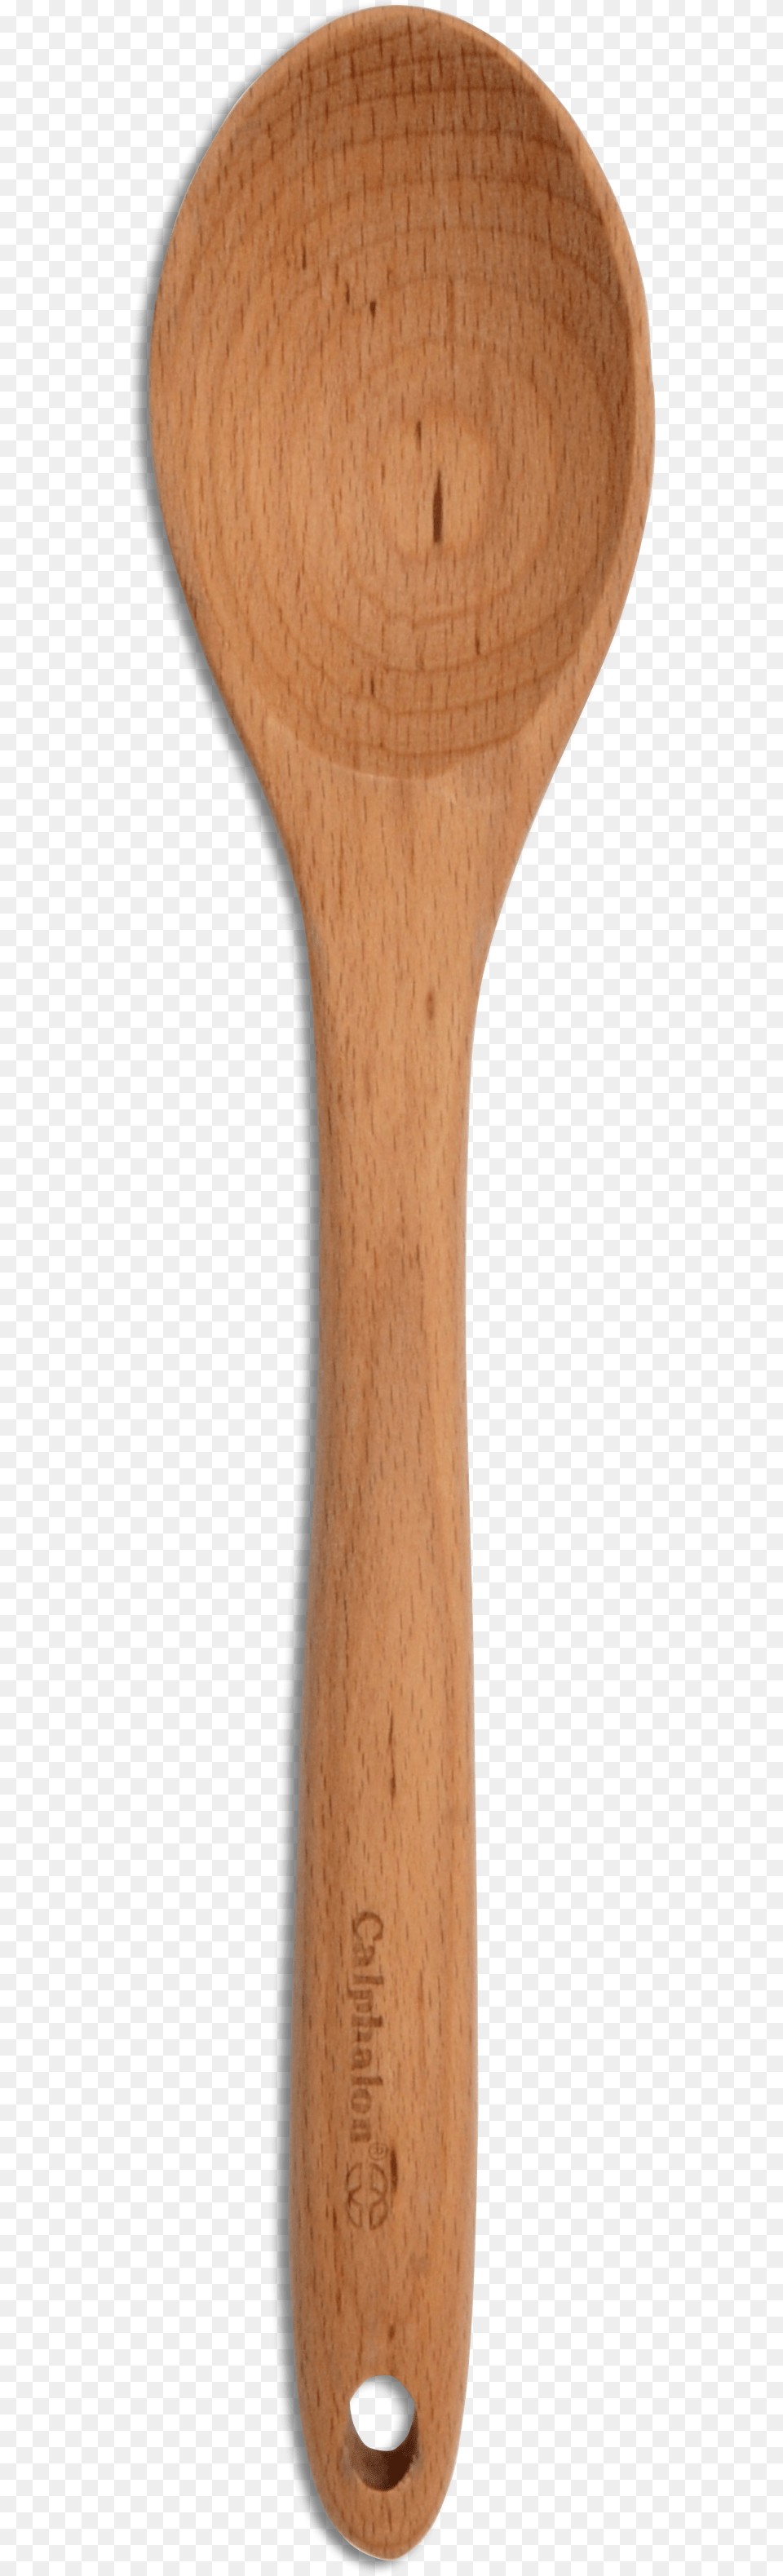 Calphalon Wooden Spoon Wood Spoon Top View, Cutlery, Kitchen Utensil, Wooden Spoon, Ping Pong Png Image